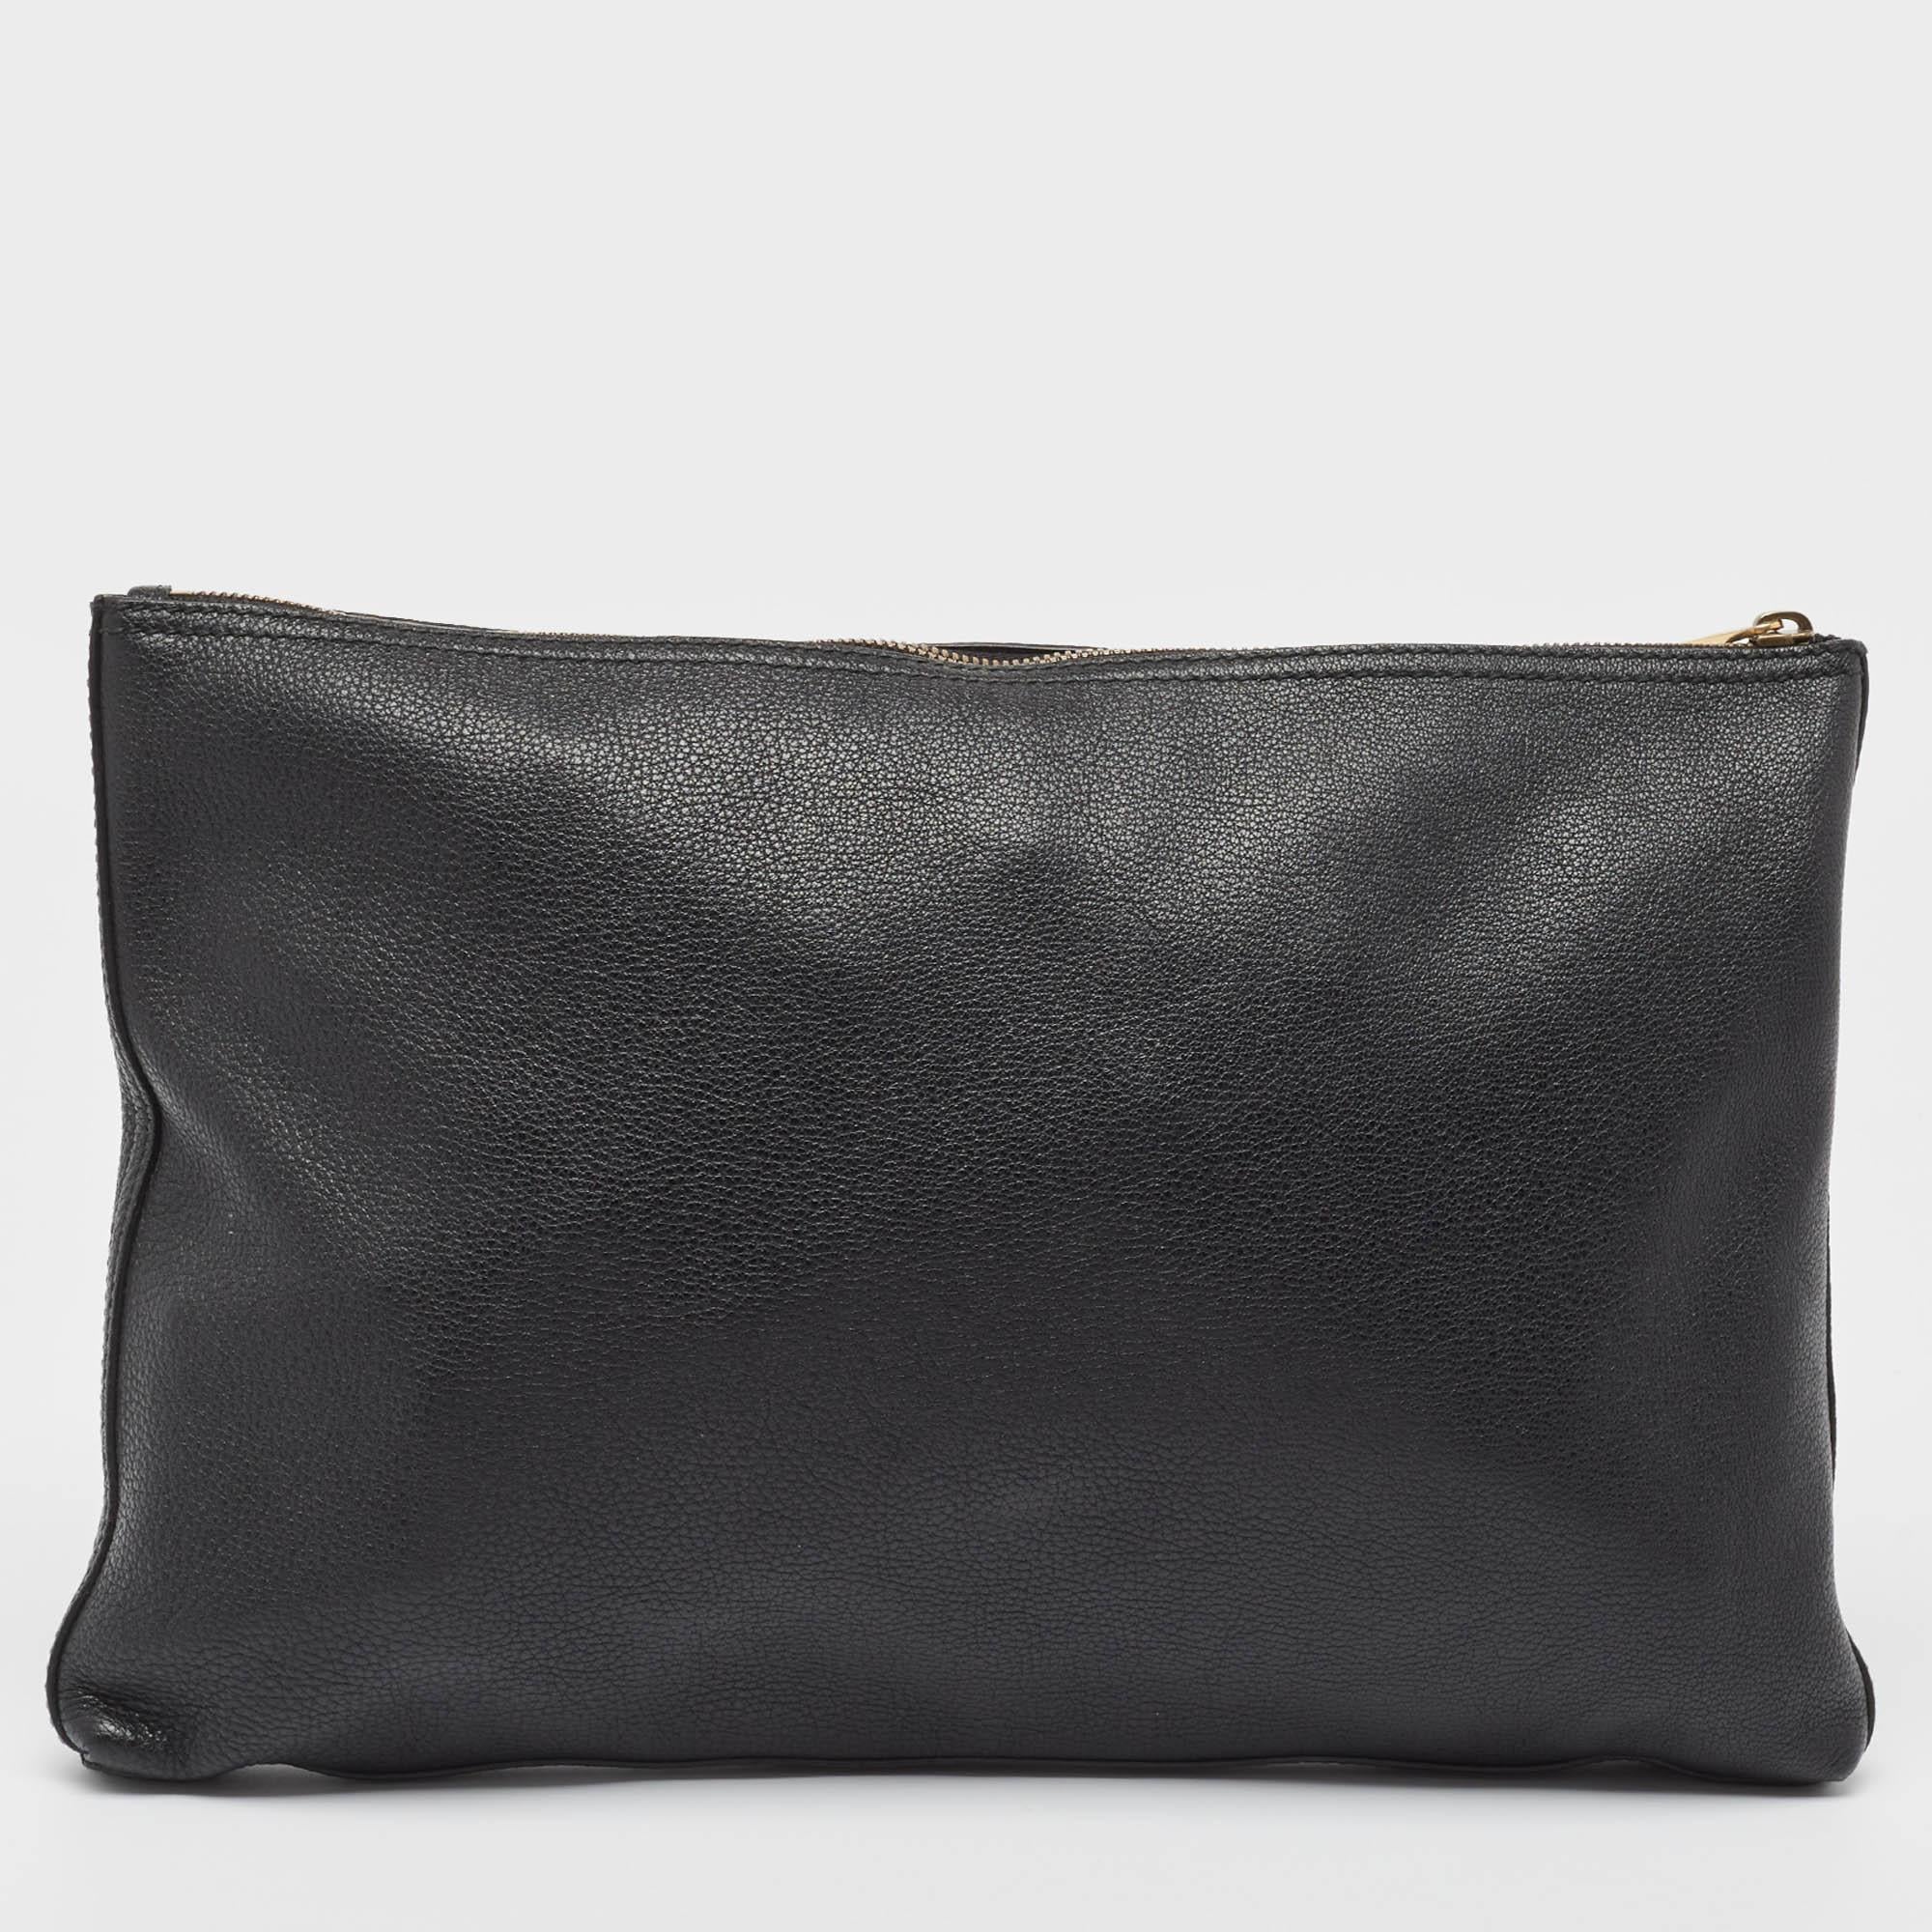 Marked by flawless craftsmanship and enduring appeal, this Gucci pouch for men is bound to be a versatile and durable accessory. It has a spacious size.

